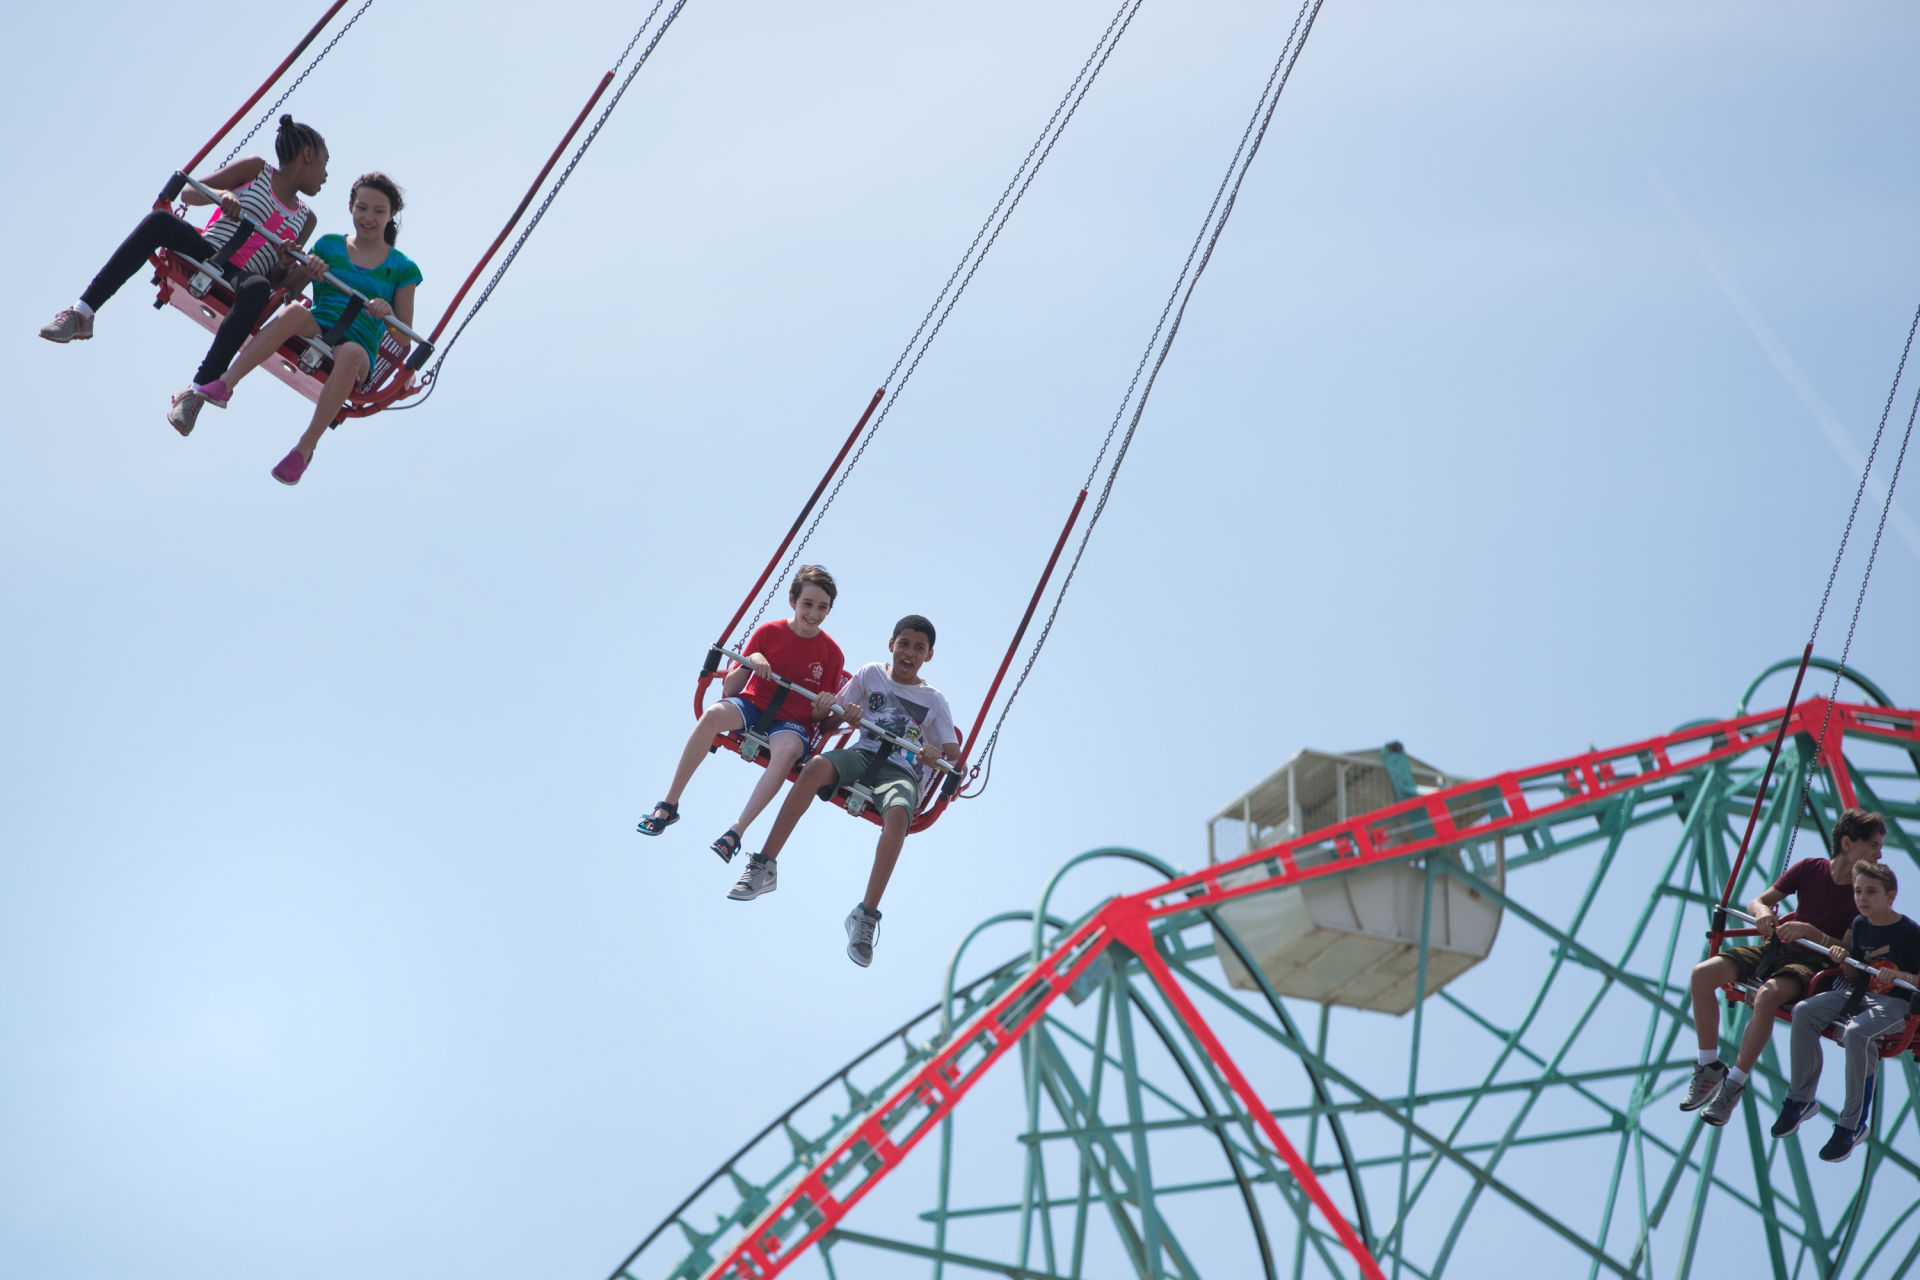 Etai Kurtzman, 12, and Terrell Gantt, 12, on a ride at Luna Park in Coney Island in Brooklyn, NY May 28, 2015. The group of students from Quest to Learn School took the day trip to Coney Island to analyze user experience on games and rides at Luna Park as part of  their late-spring school curriculum.  